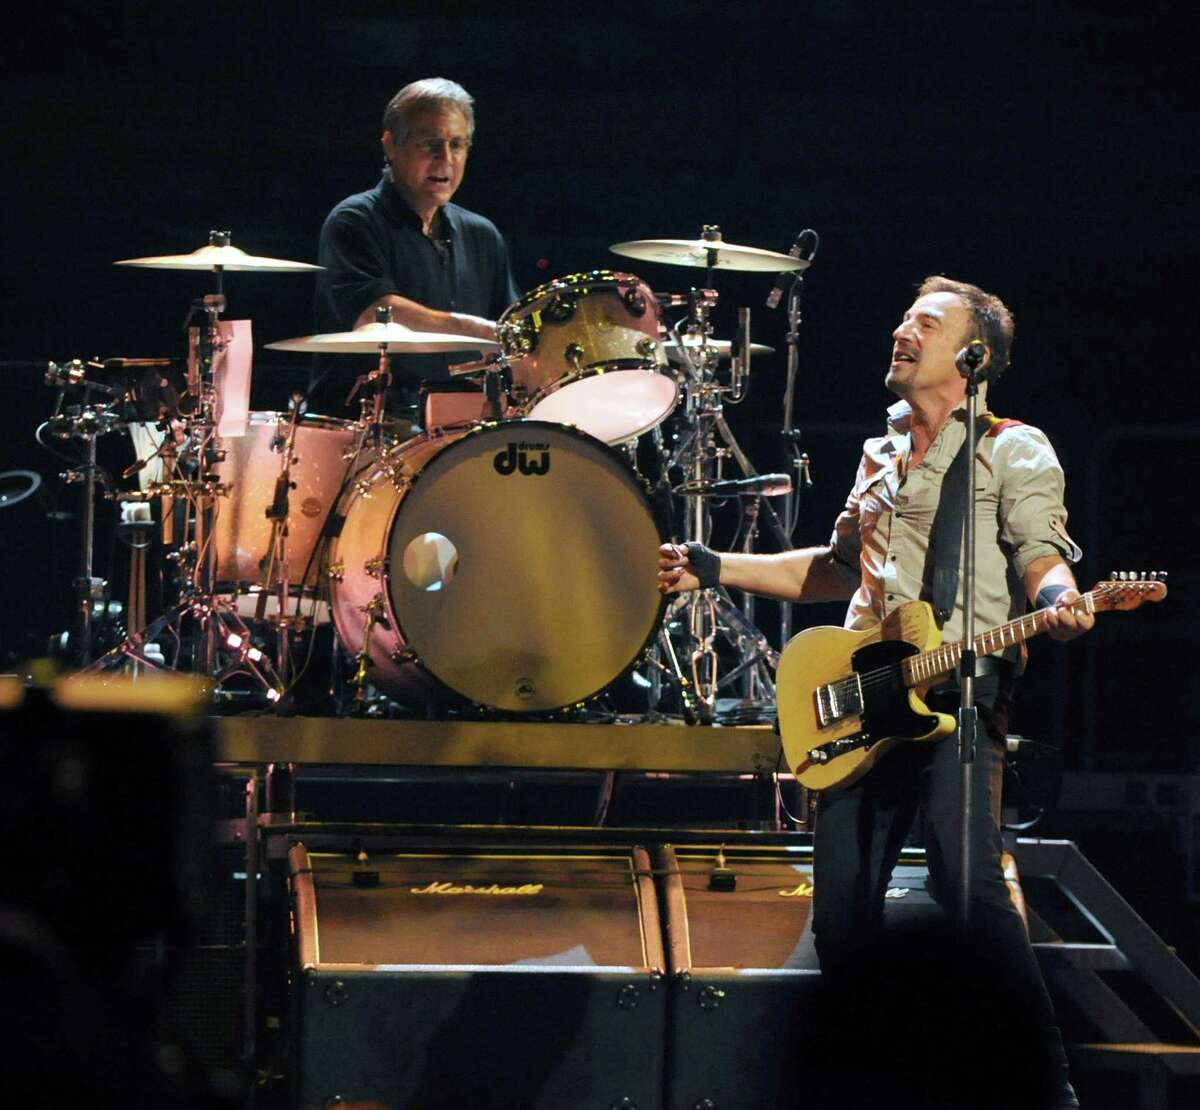 Bruce Springsteen, right, and The E Street Band perform at the Times Union Center on Tuesday May 13, 2014 in Albany, N.Y. (Michael P. Farrell/Times Union)